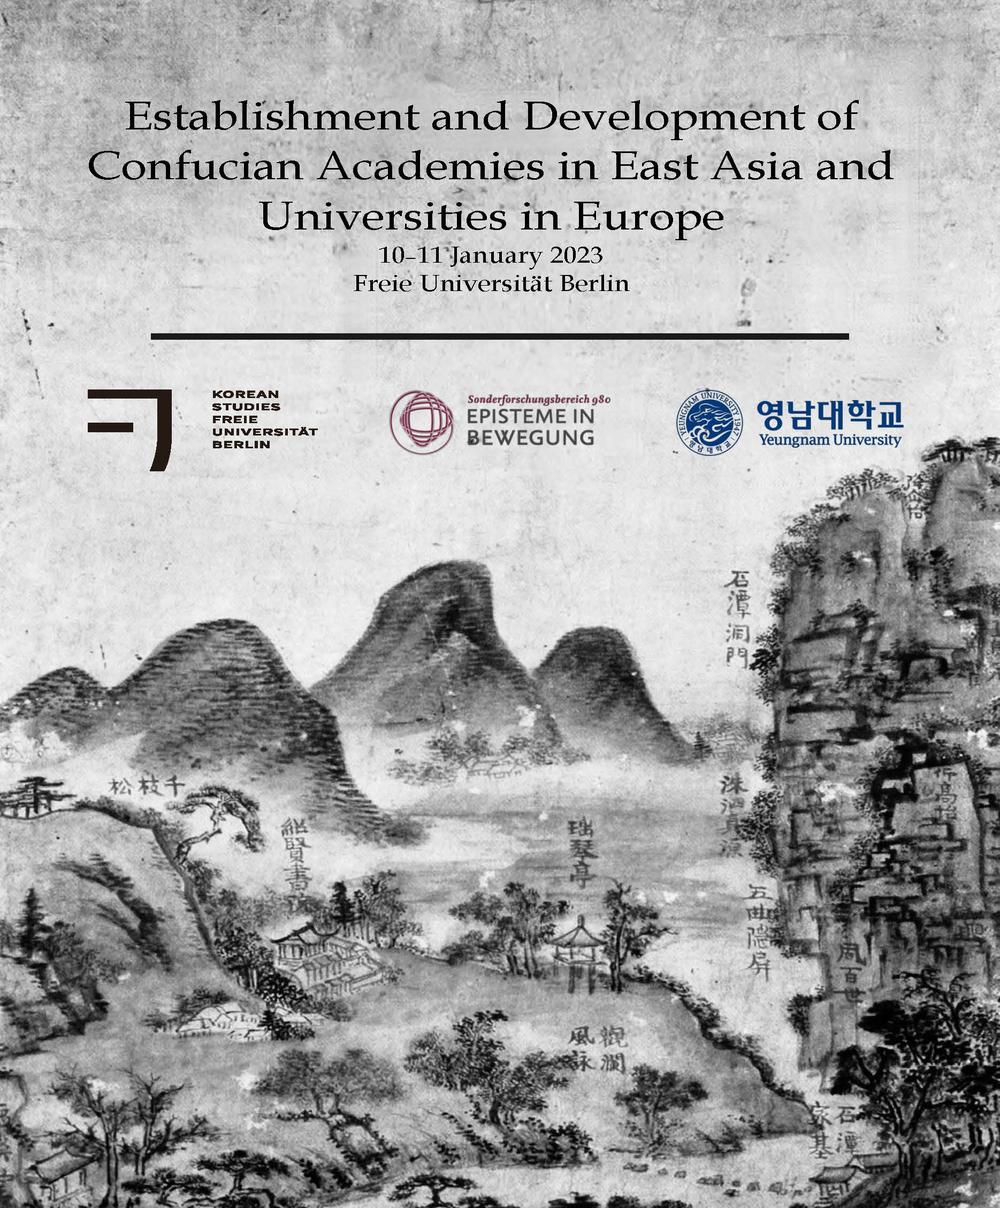 Establishment and Development of Confucian Academies in East Asia and Universities in Europe